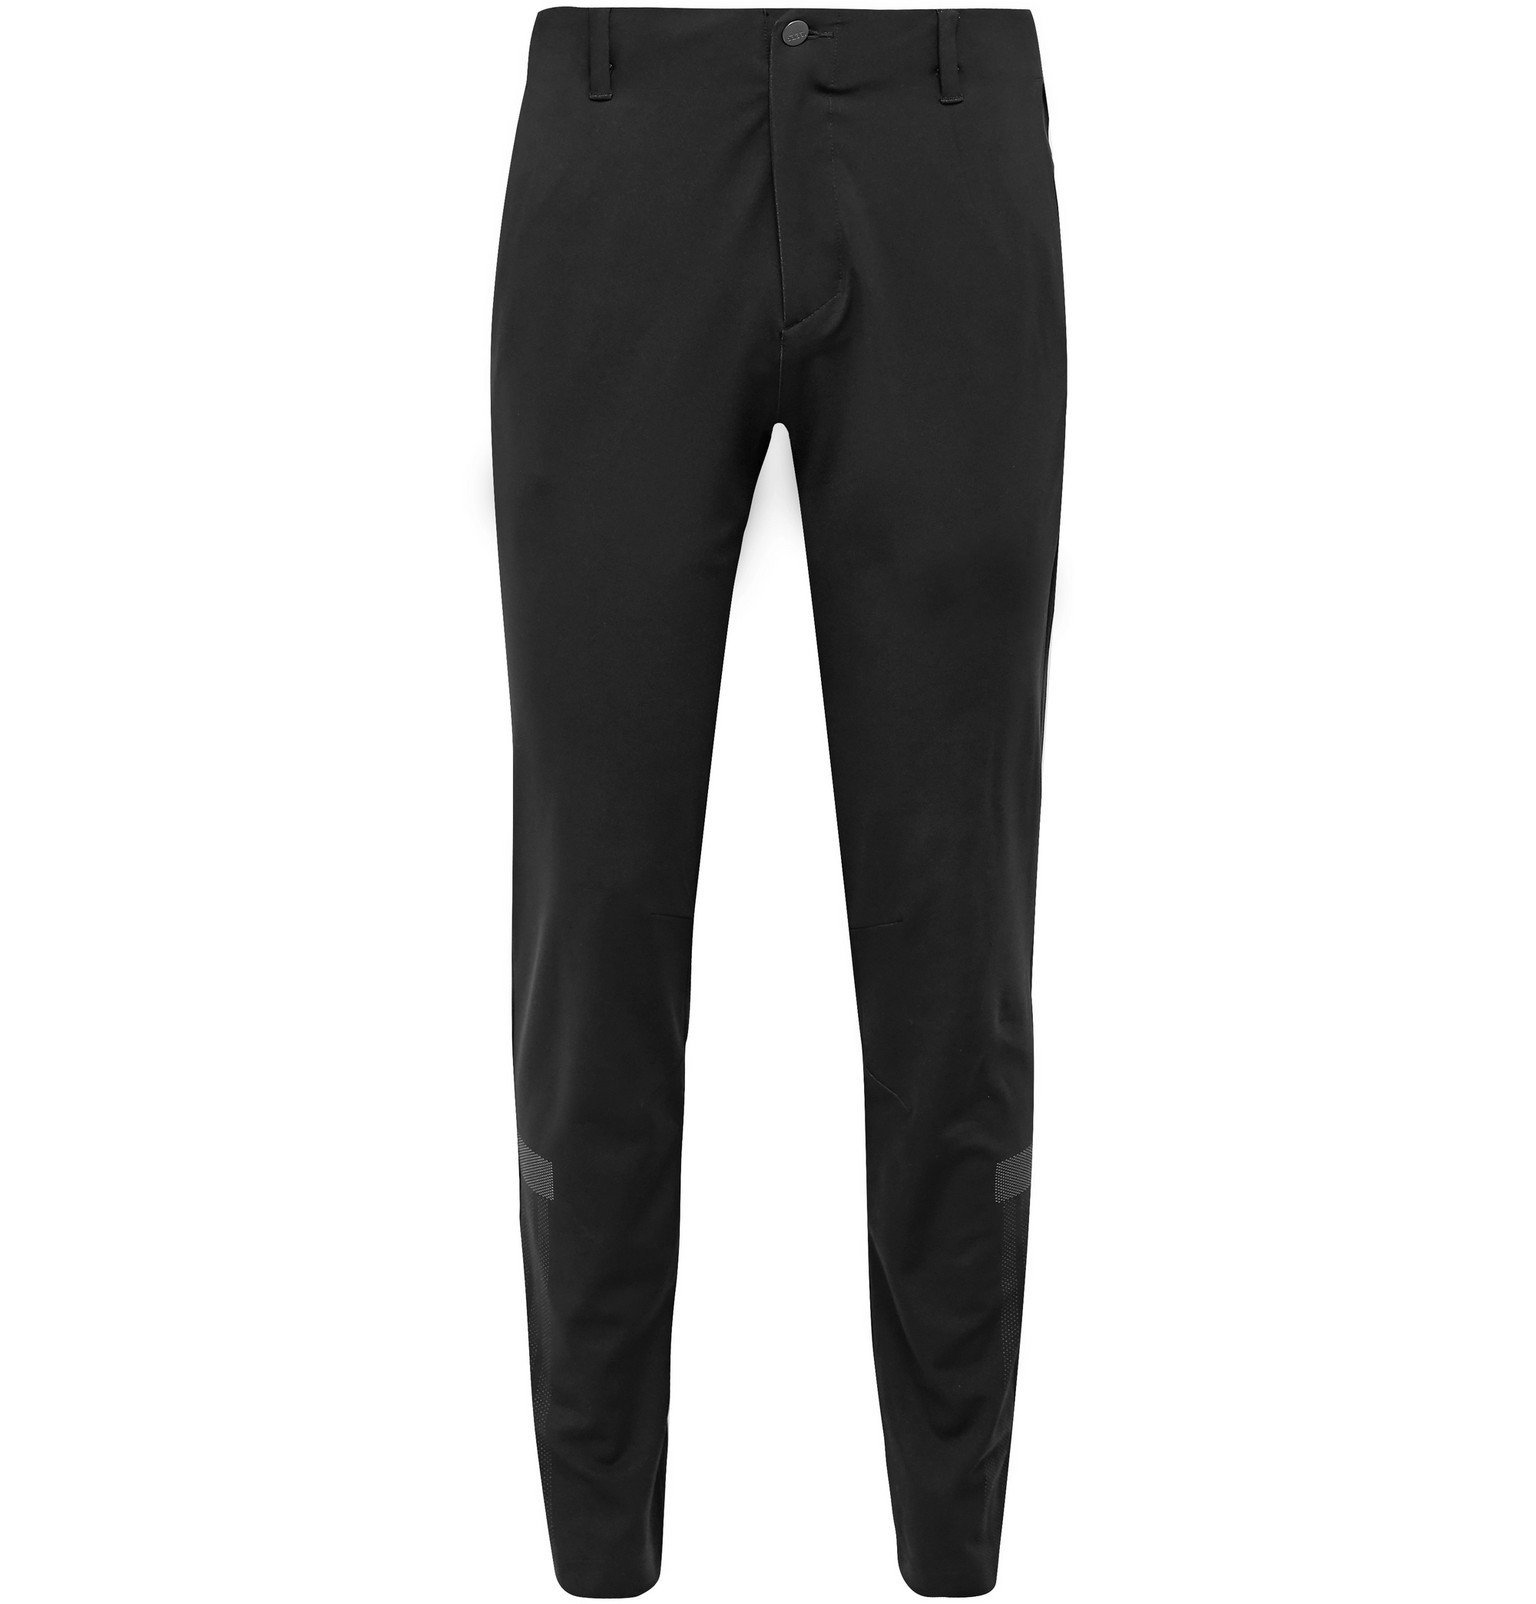 slim fit tapered golf pants